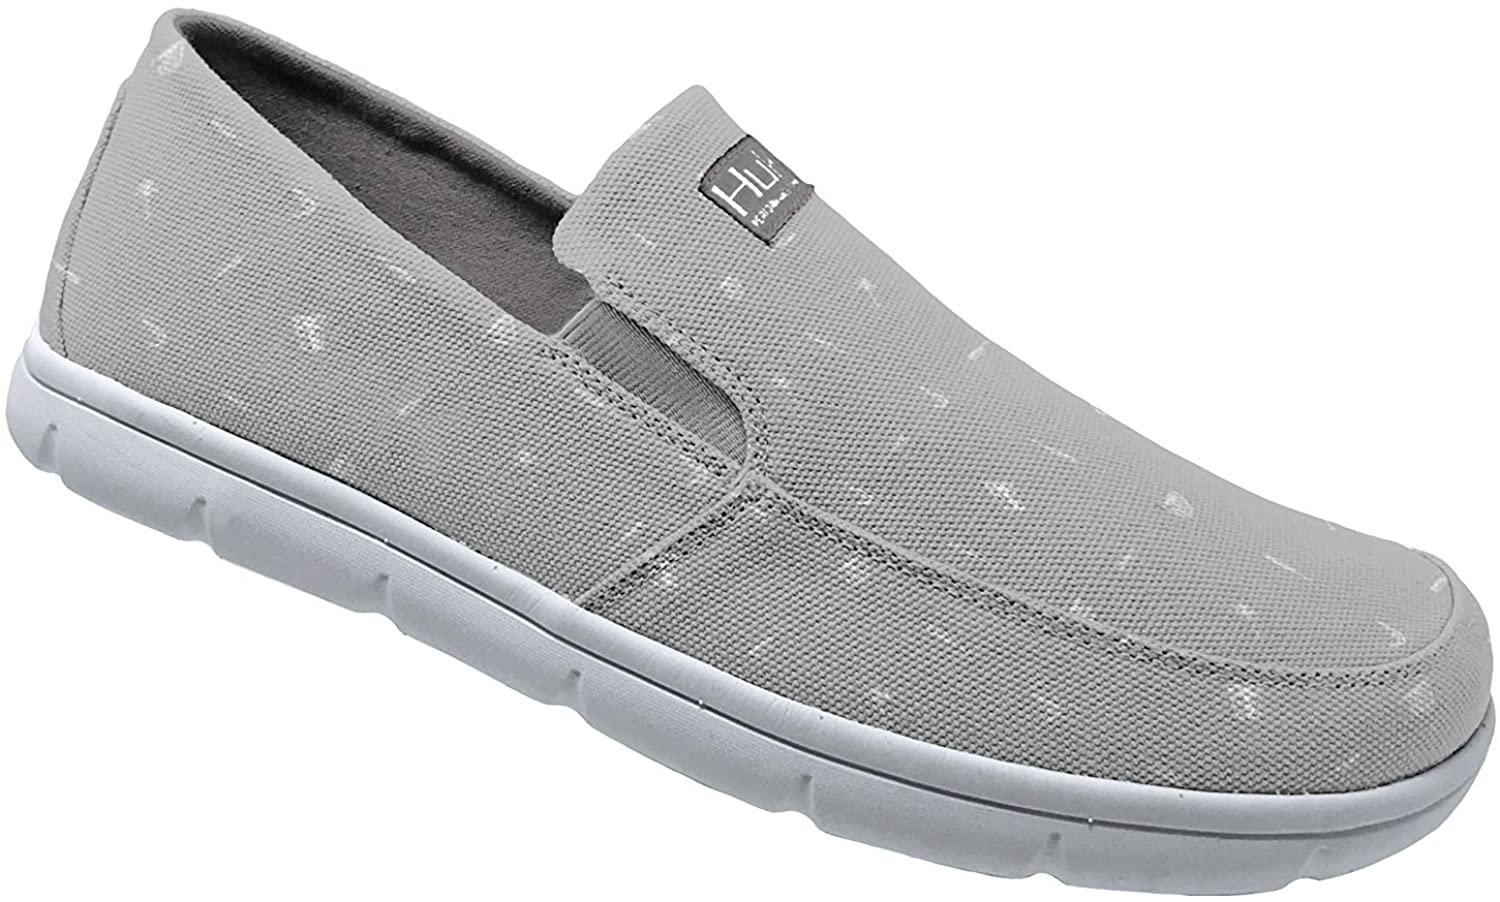 Men's Huk Brewster Print Slip-On Shoe in Lowcountry Glacier from the side